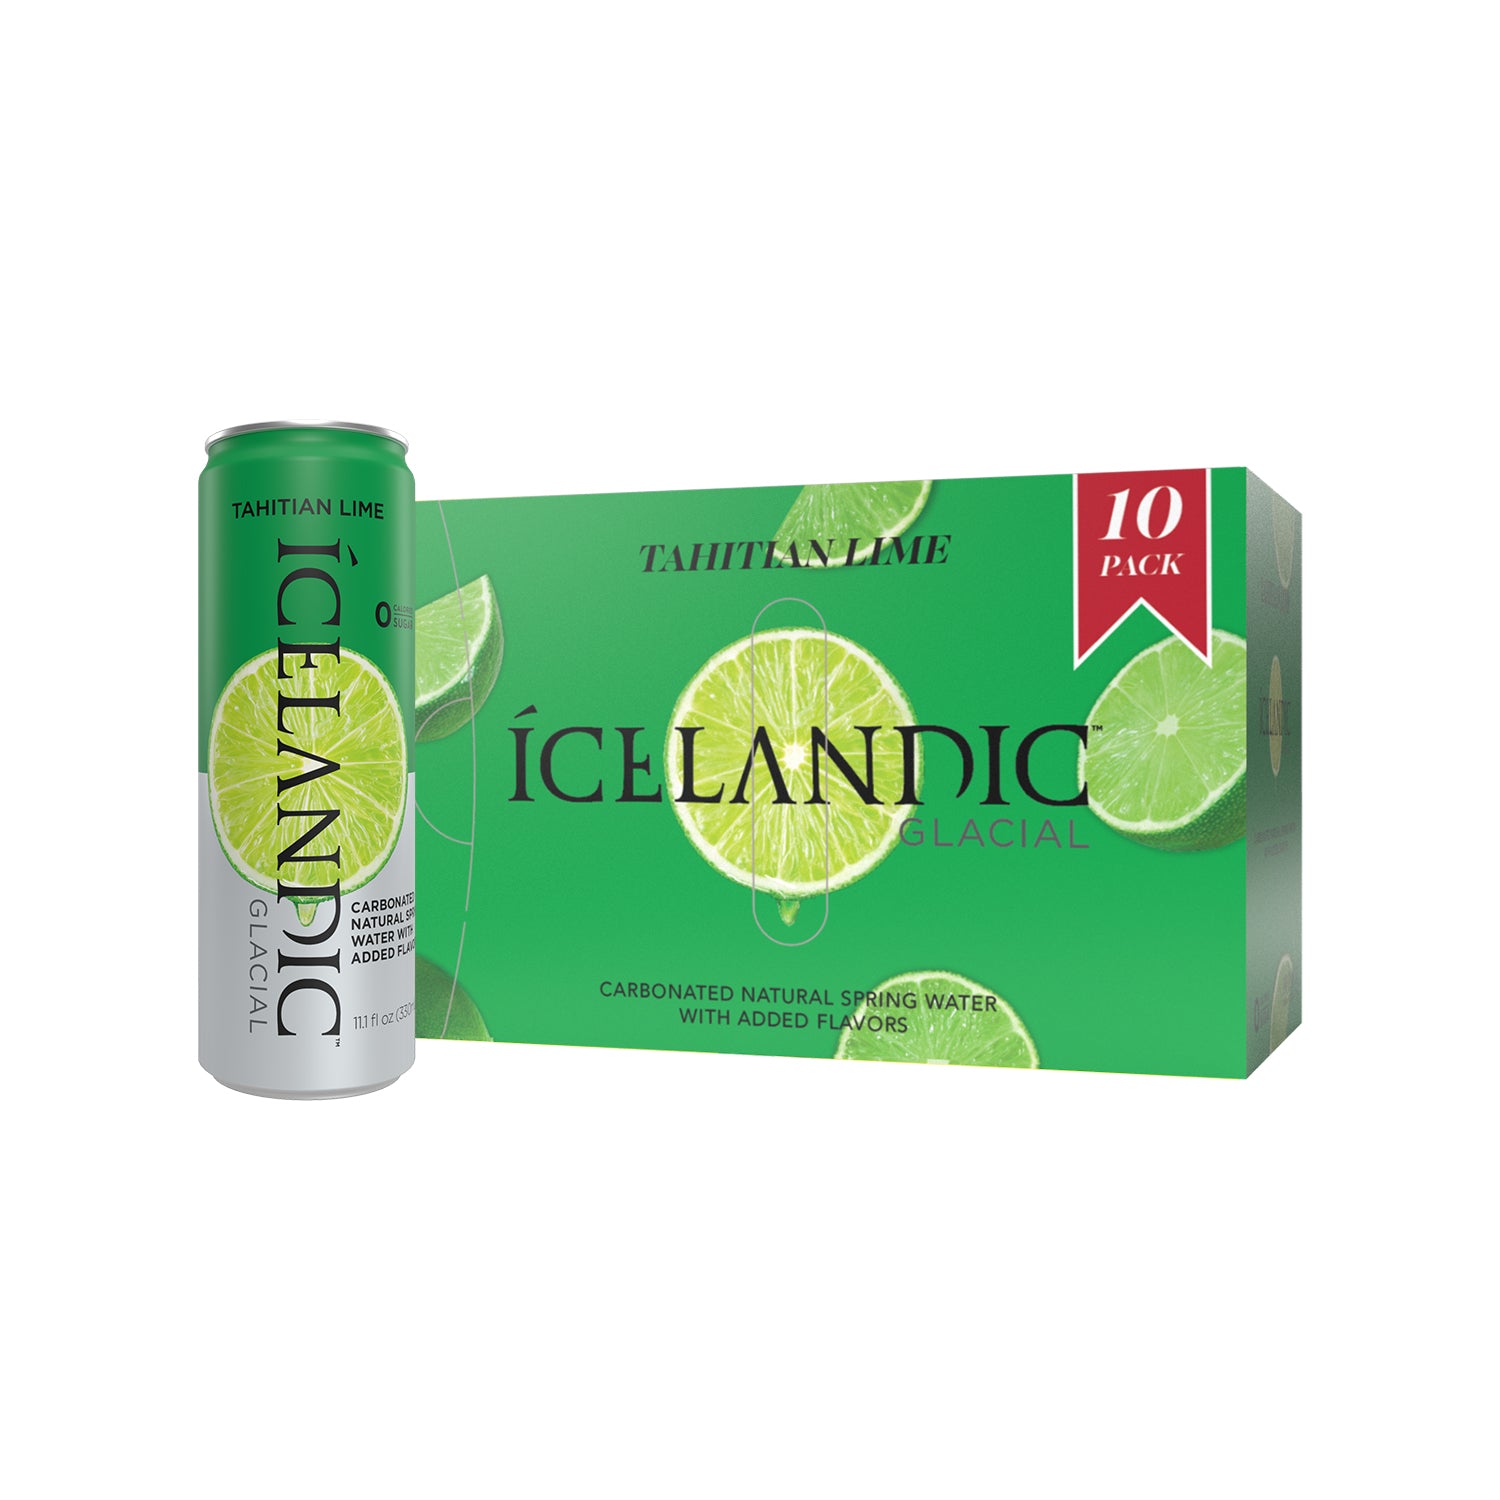 Icelandic Glacial Sparkling Tahitian Lime Water in Aluminum Cans (10 pack) - Icelandic Glacial